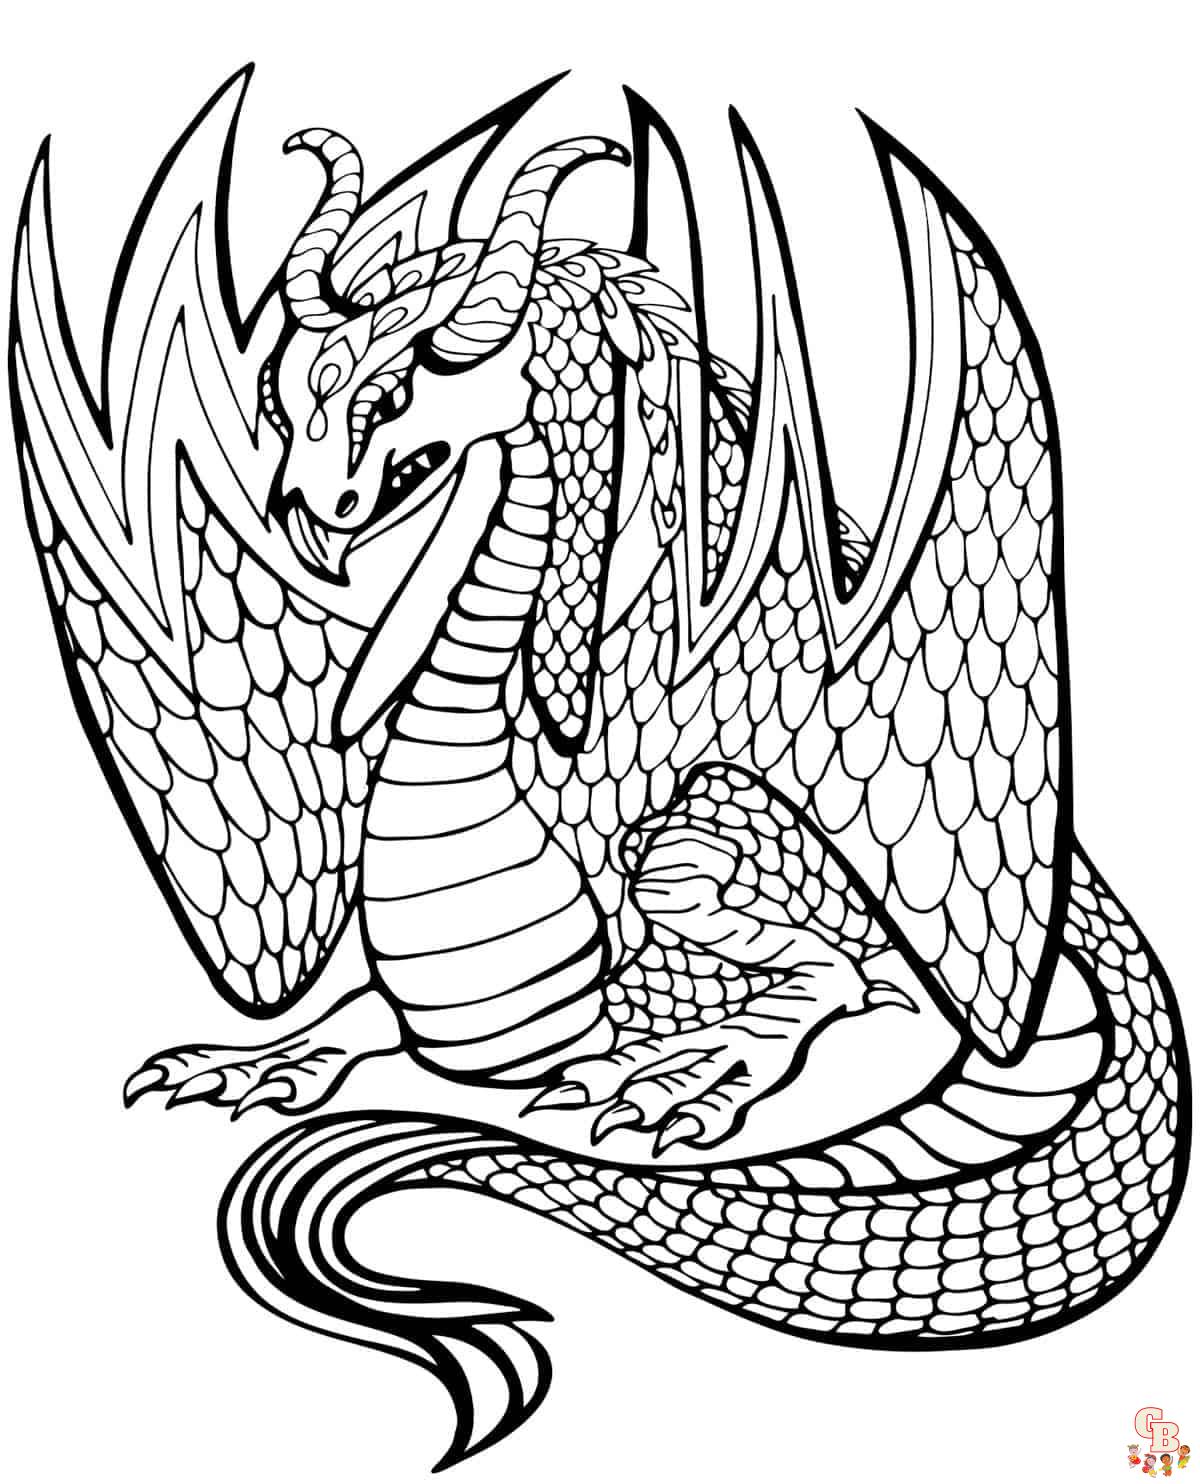 Mythical Creatures Coloring Pages